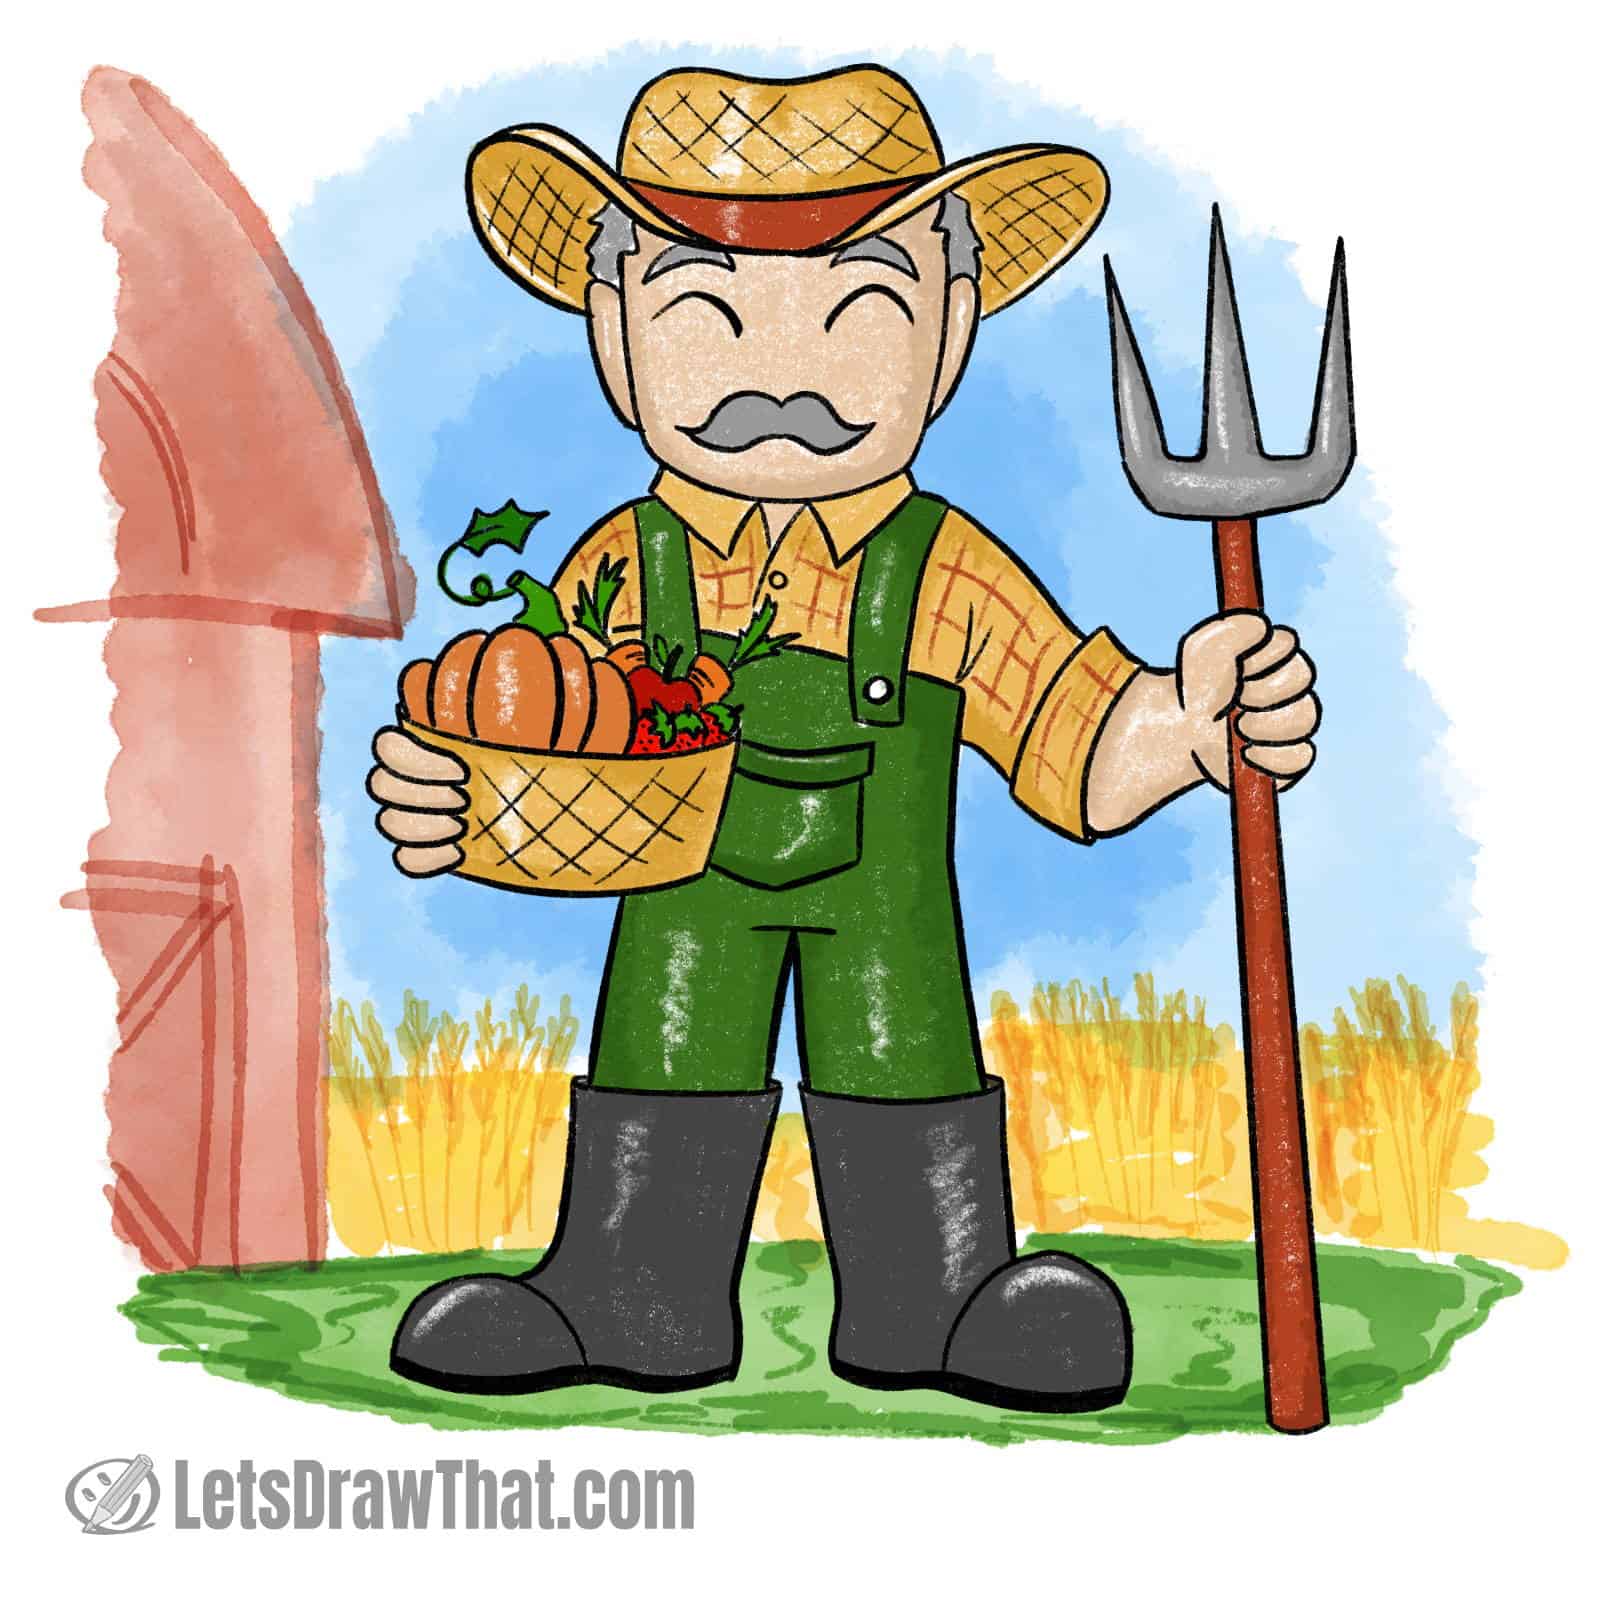 How to draw a farmer: finished drawing coloured-in